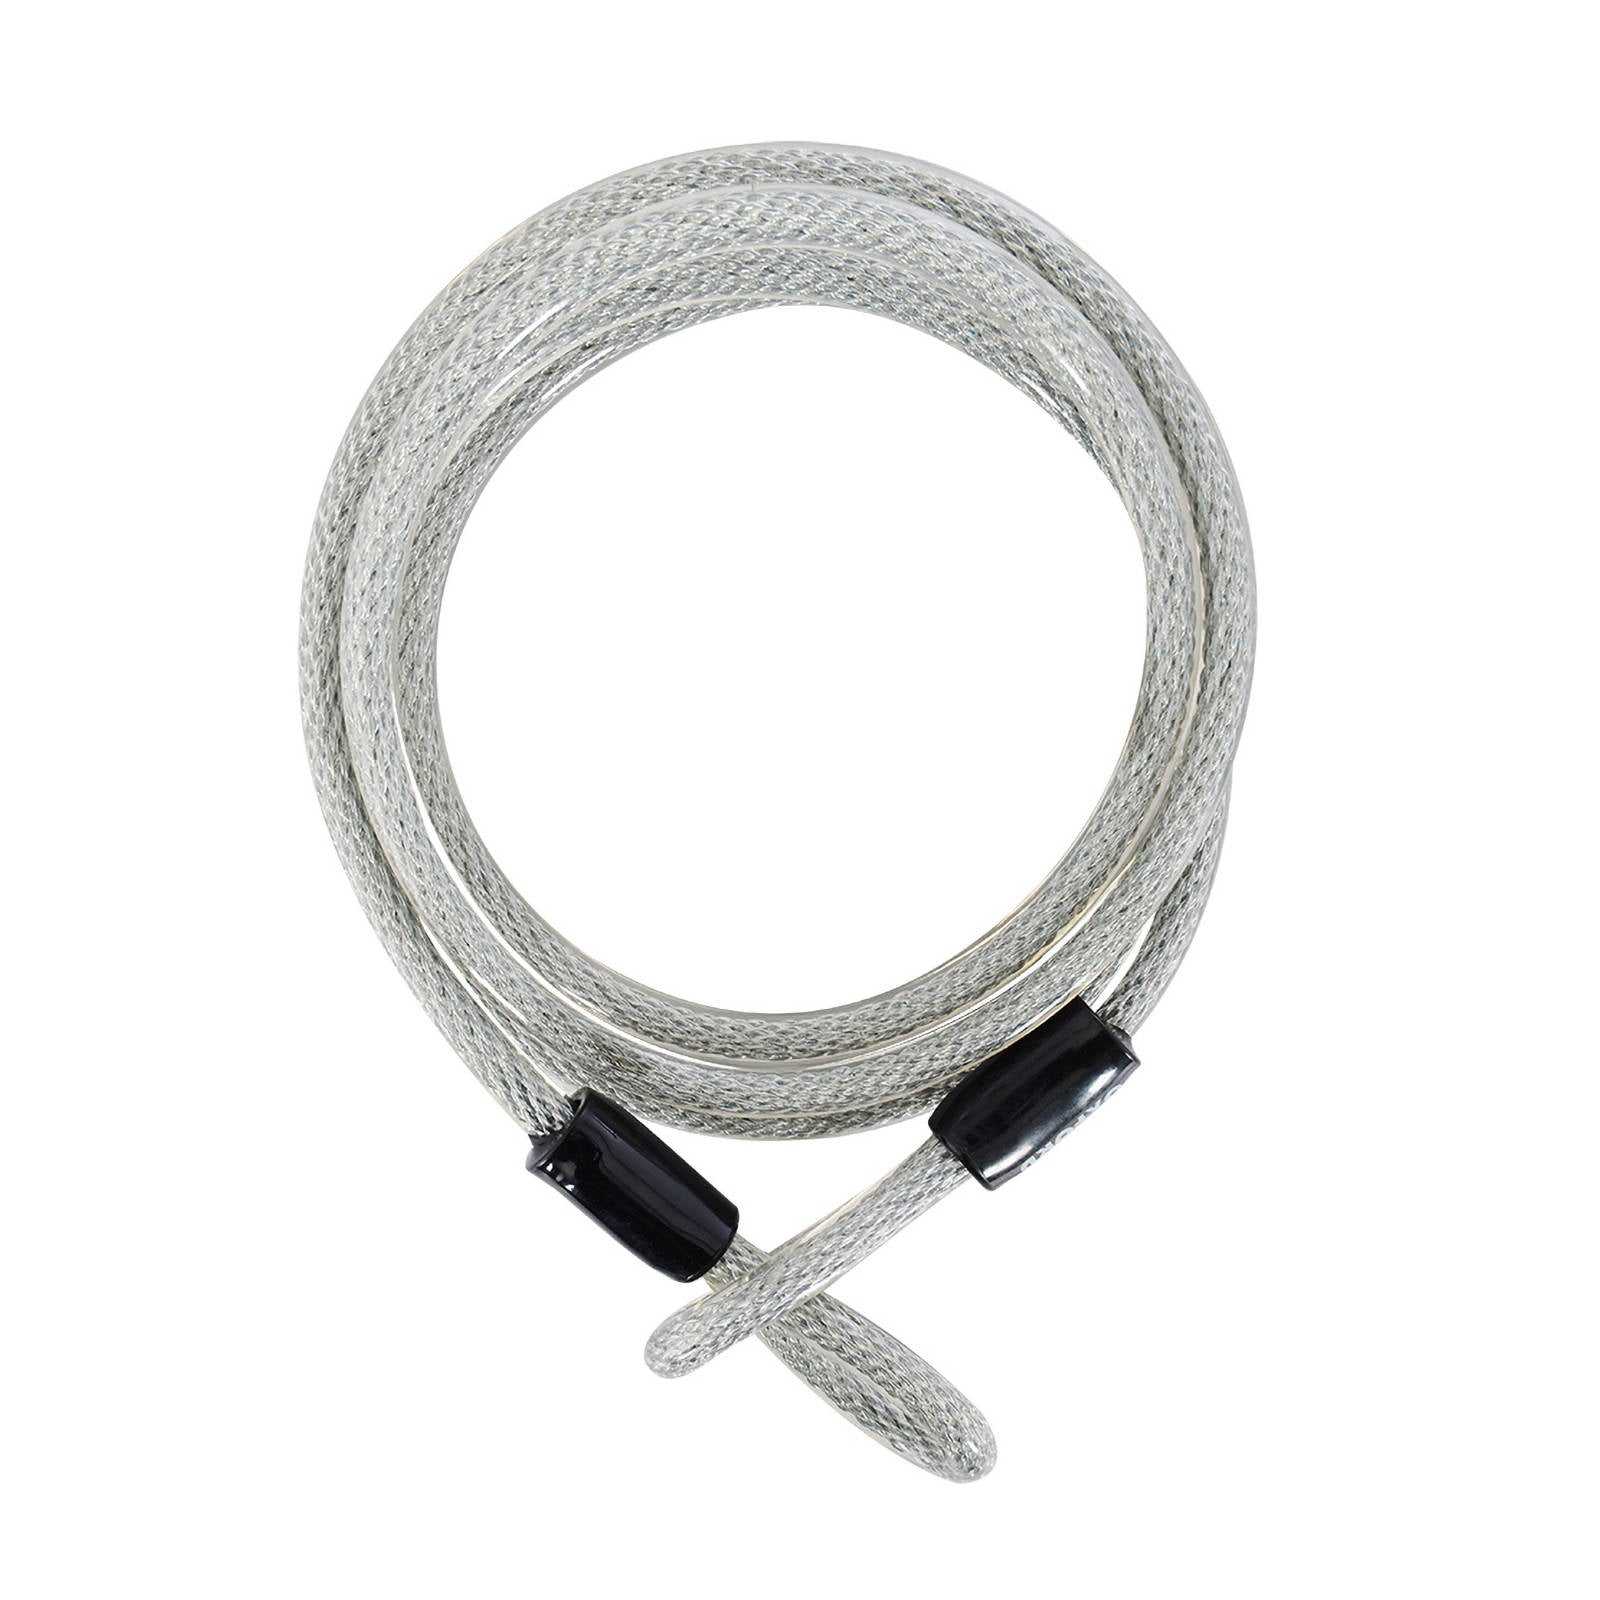 Oxford, Oxford Lockmate Cable Lock 12mm X 2.5m HD Cable